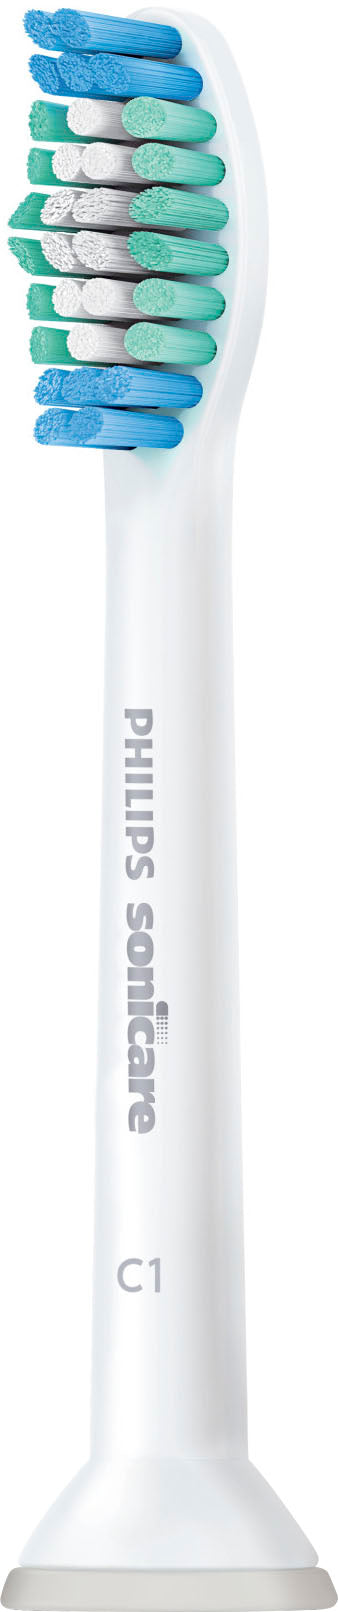 Philips Sonicare - 2100 Power Toothbrush, Rechargeable Electric Toothbrush - White Mint_2